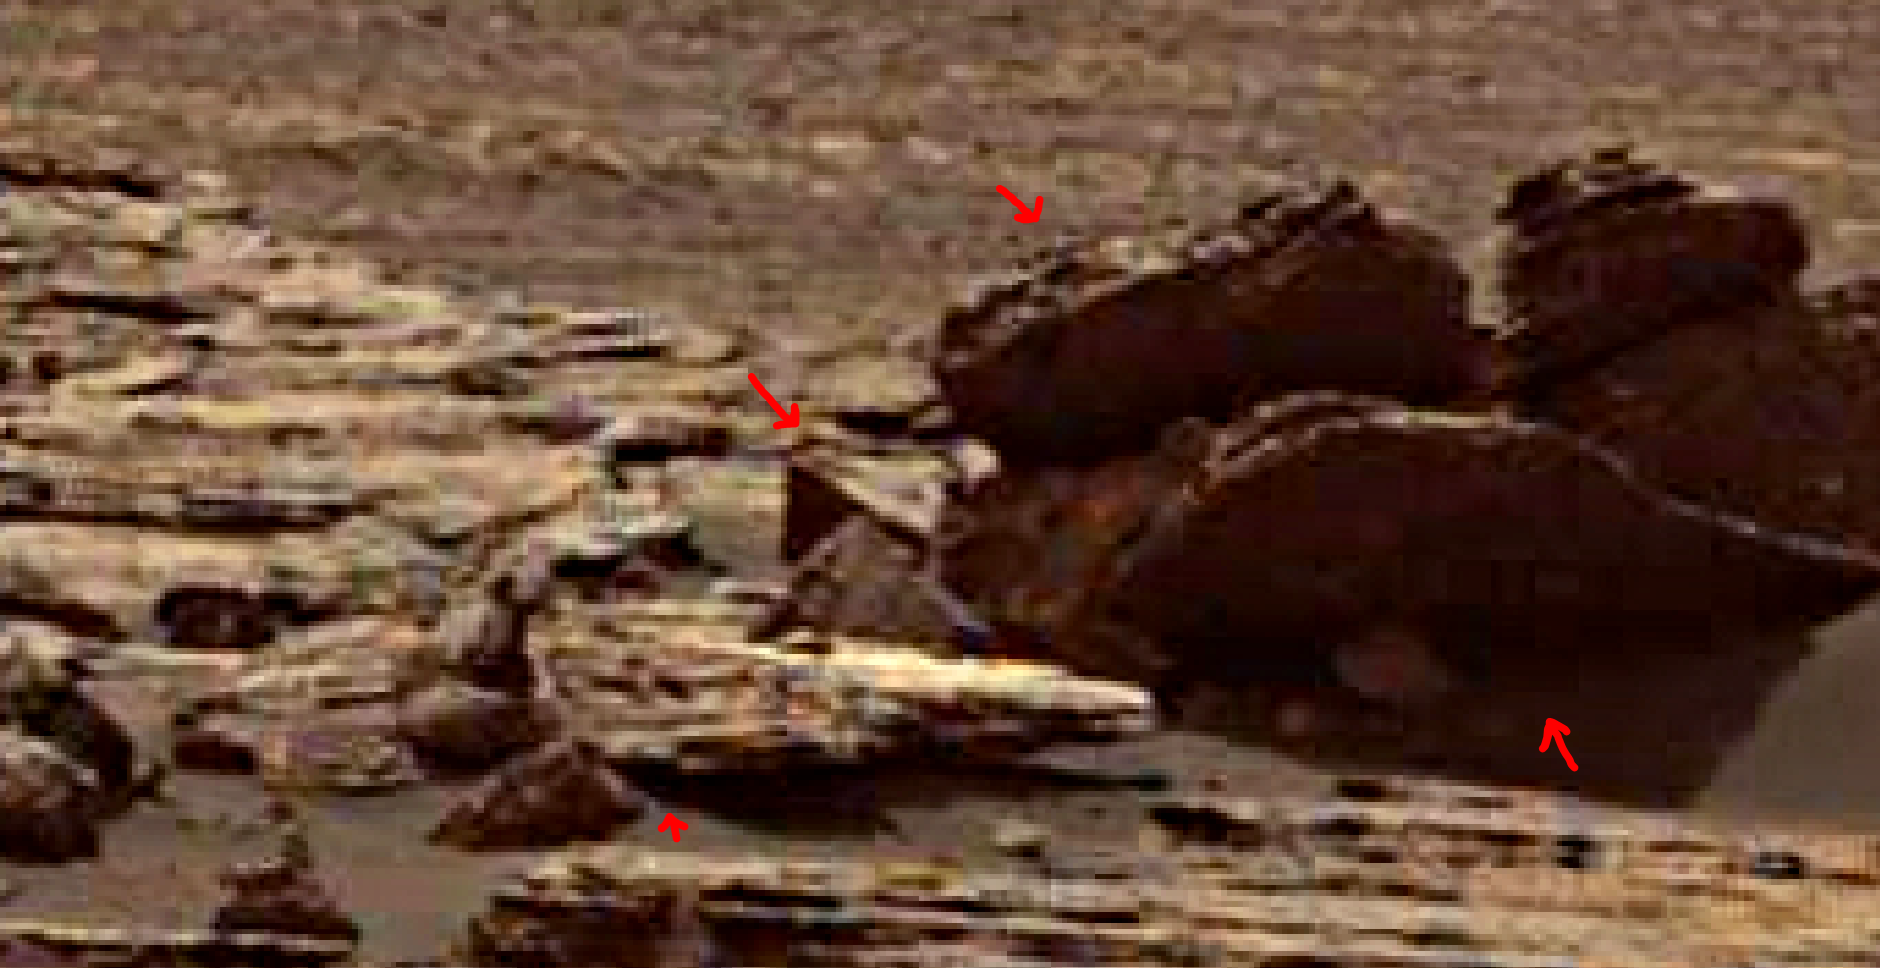 mars-sol-1485-anomaly-artifacts-5-was-life-on-mars